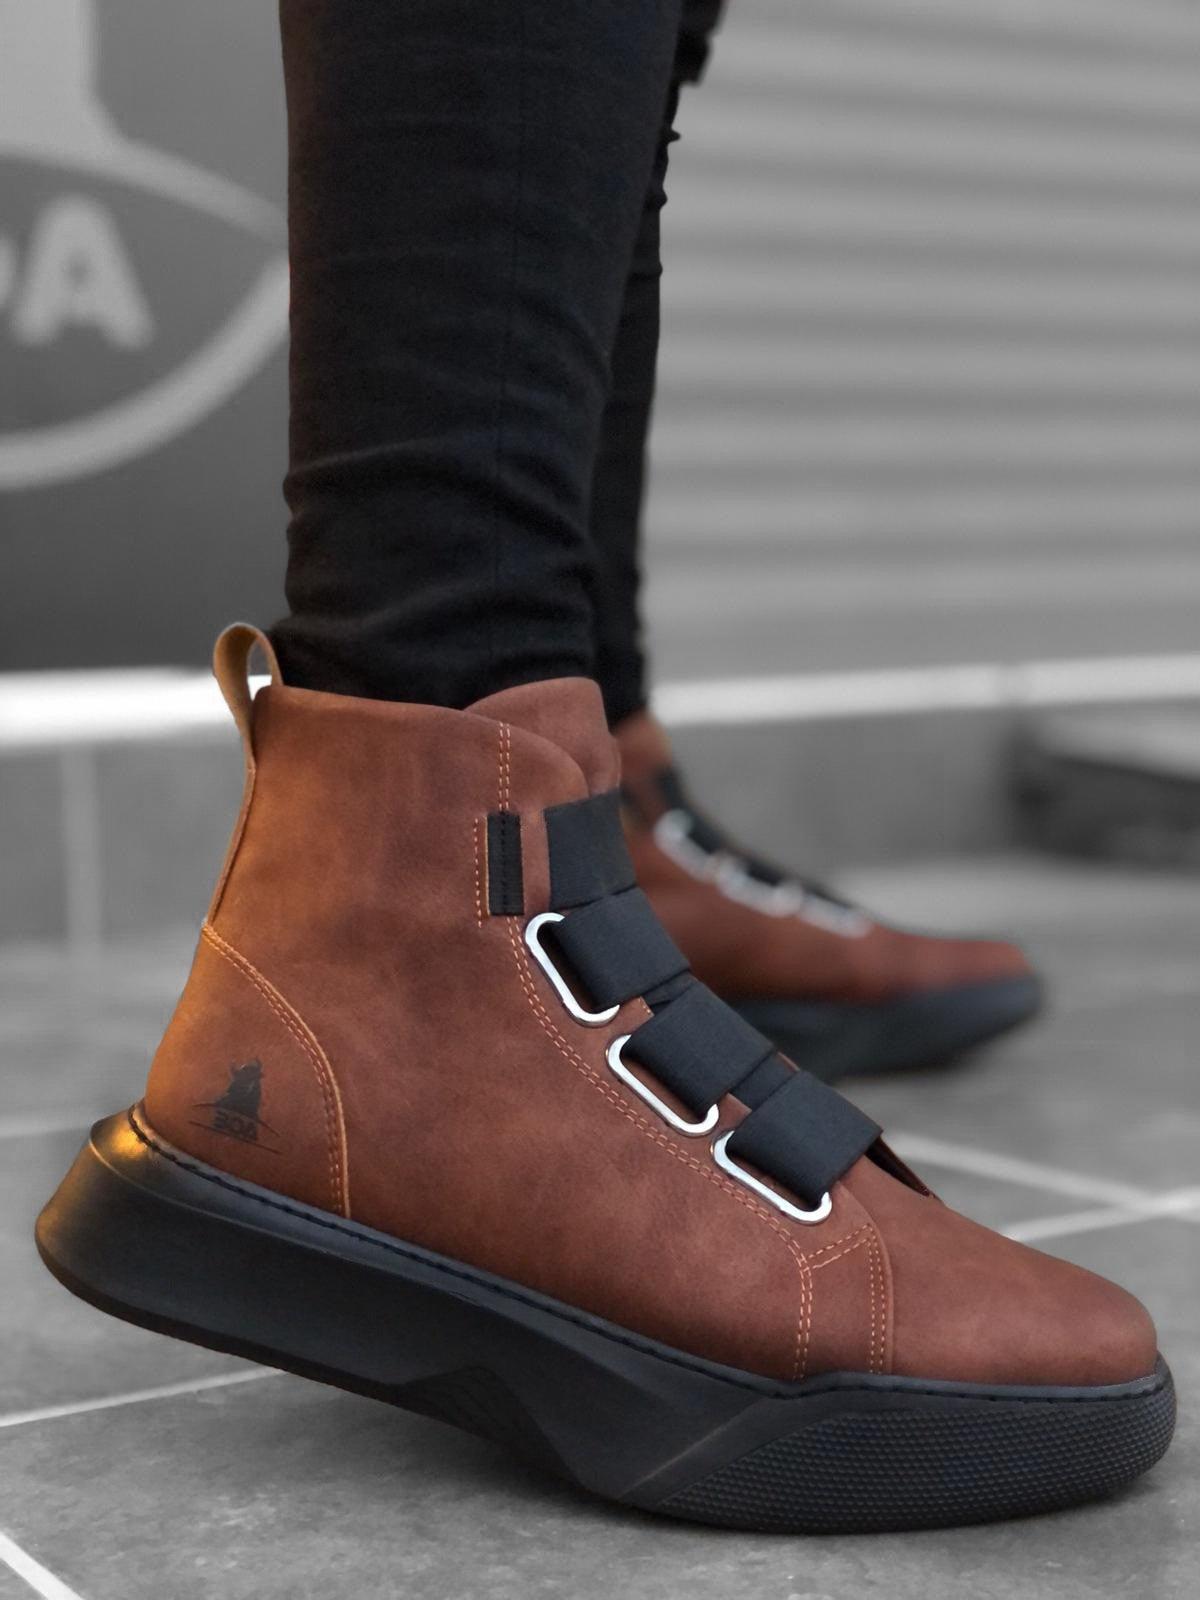 BA0142 Men's High-Sole Brown Sport Boots With Band - STREET MODE ™